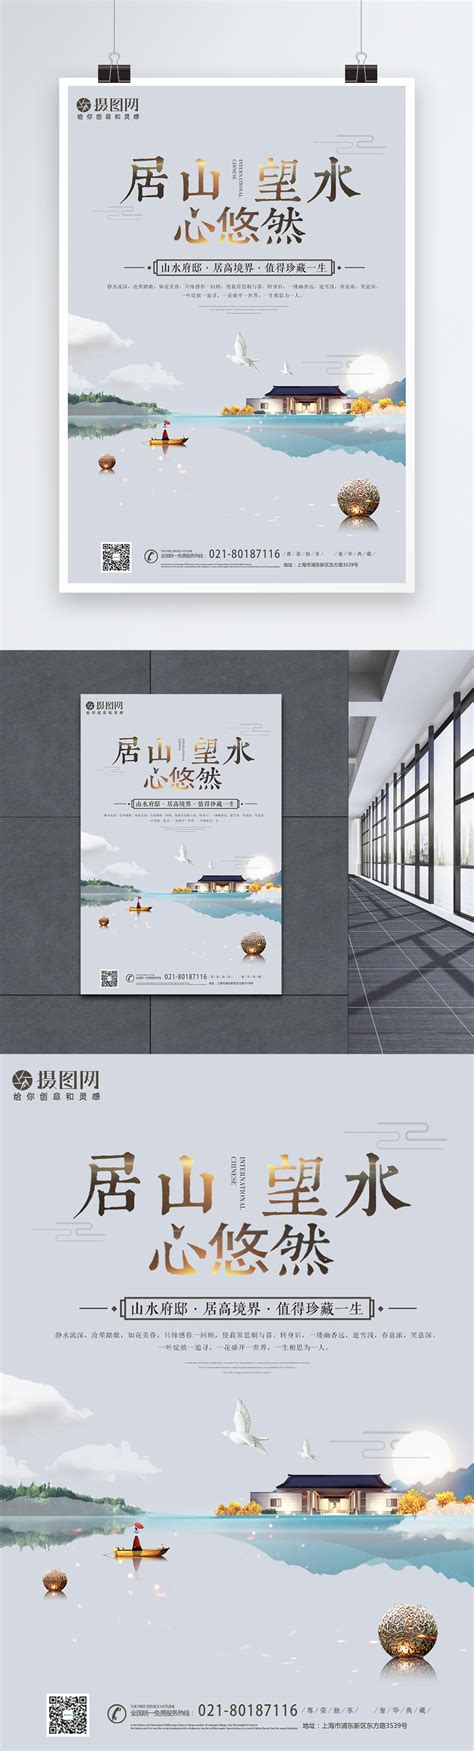 Simple And Elegant Chinese Real Estate Posters Template Imagepicture